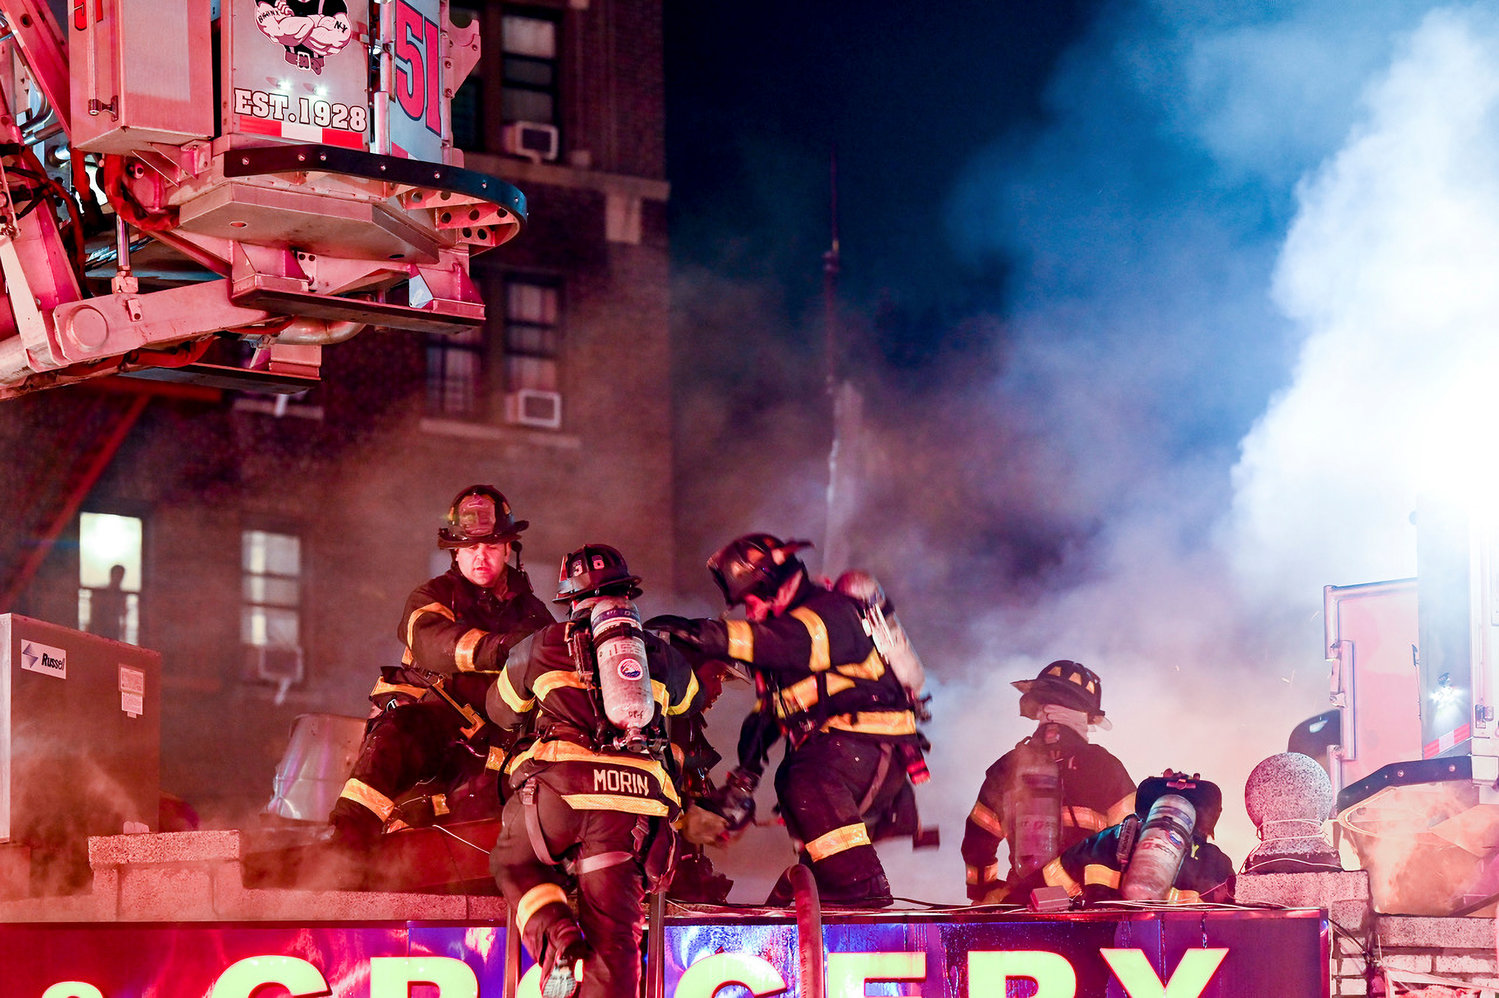 Firefighters make their way to the roof of Bailey Deli & Grocery in an effort to try and save the popular bodega on the corner of West 238th Street and Bailey Avenue. Investigators believe the fire started at a neighboring take-out restaurant, and quickly severely damaged five businesses along that stretch of Bailey.